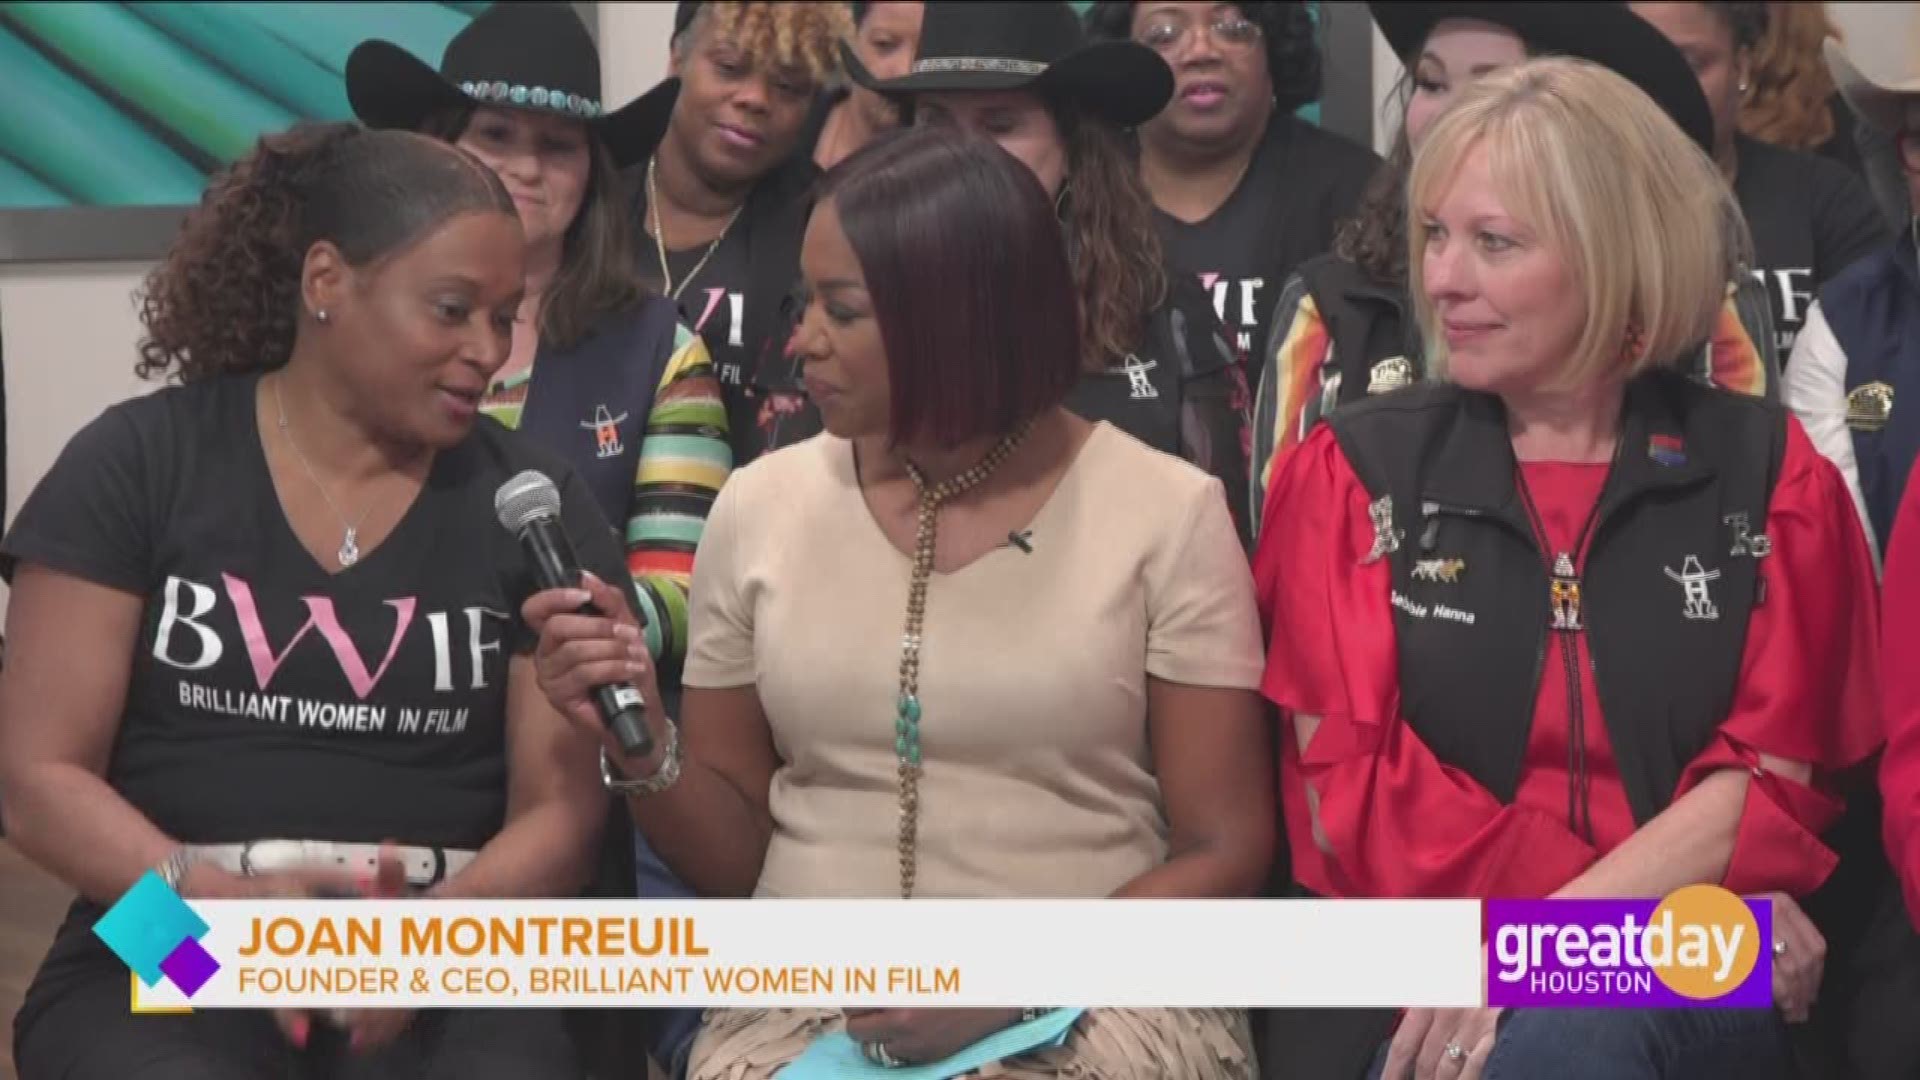 Founder, Joan Montreuil, chats with Deborah Duncan about their upcoming film festival.